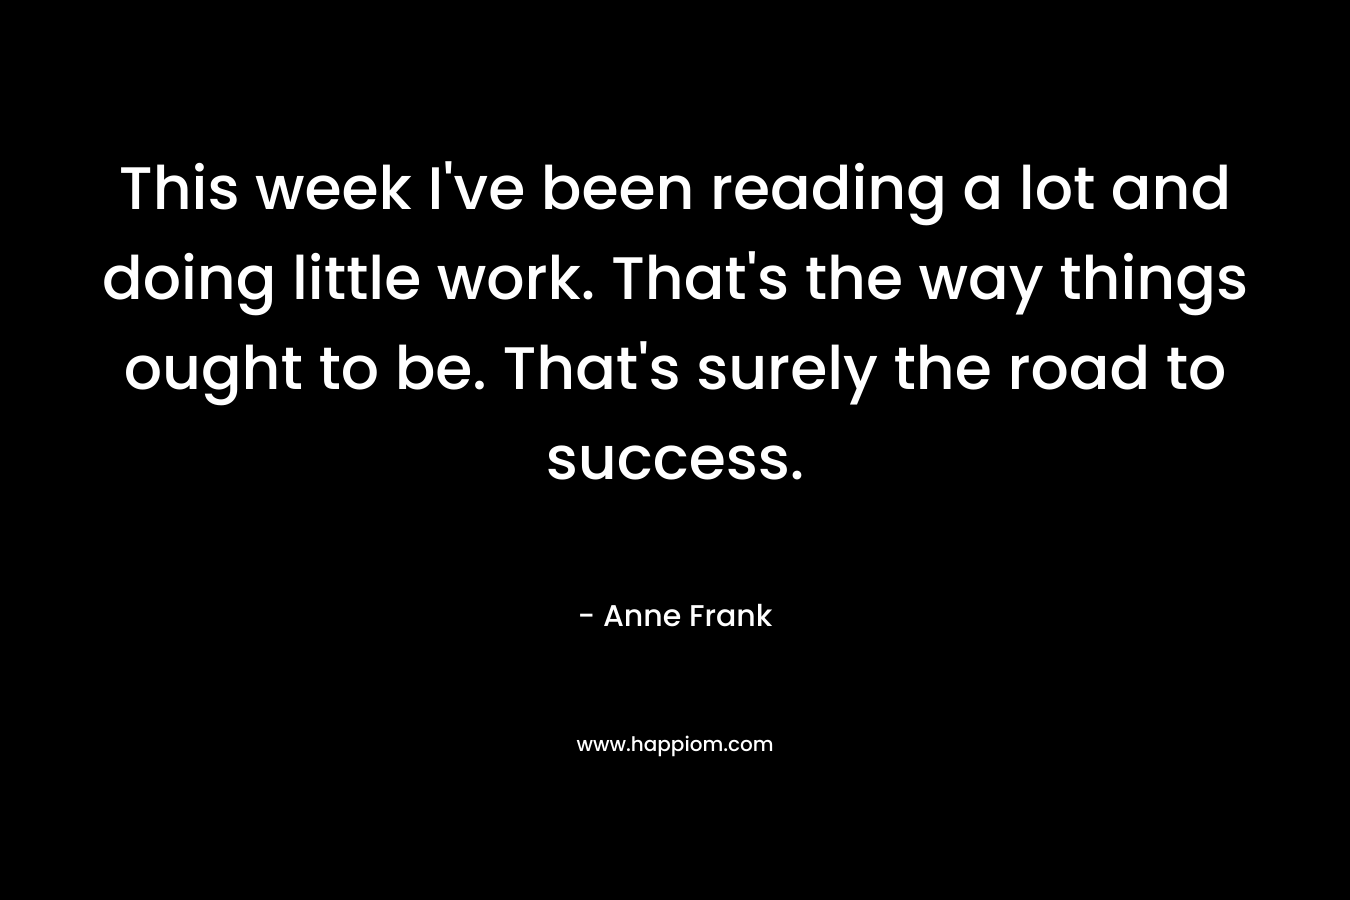 This week I've been reading a lot and doing little work. That's the way things ought to be. That's surely the road to success.